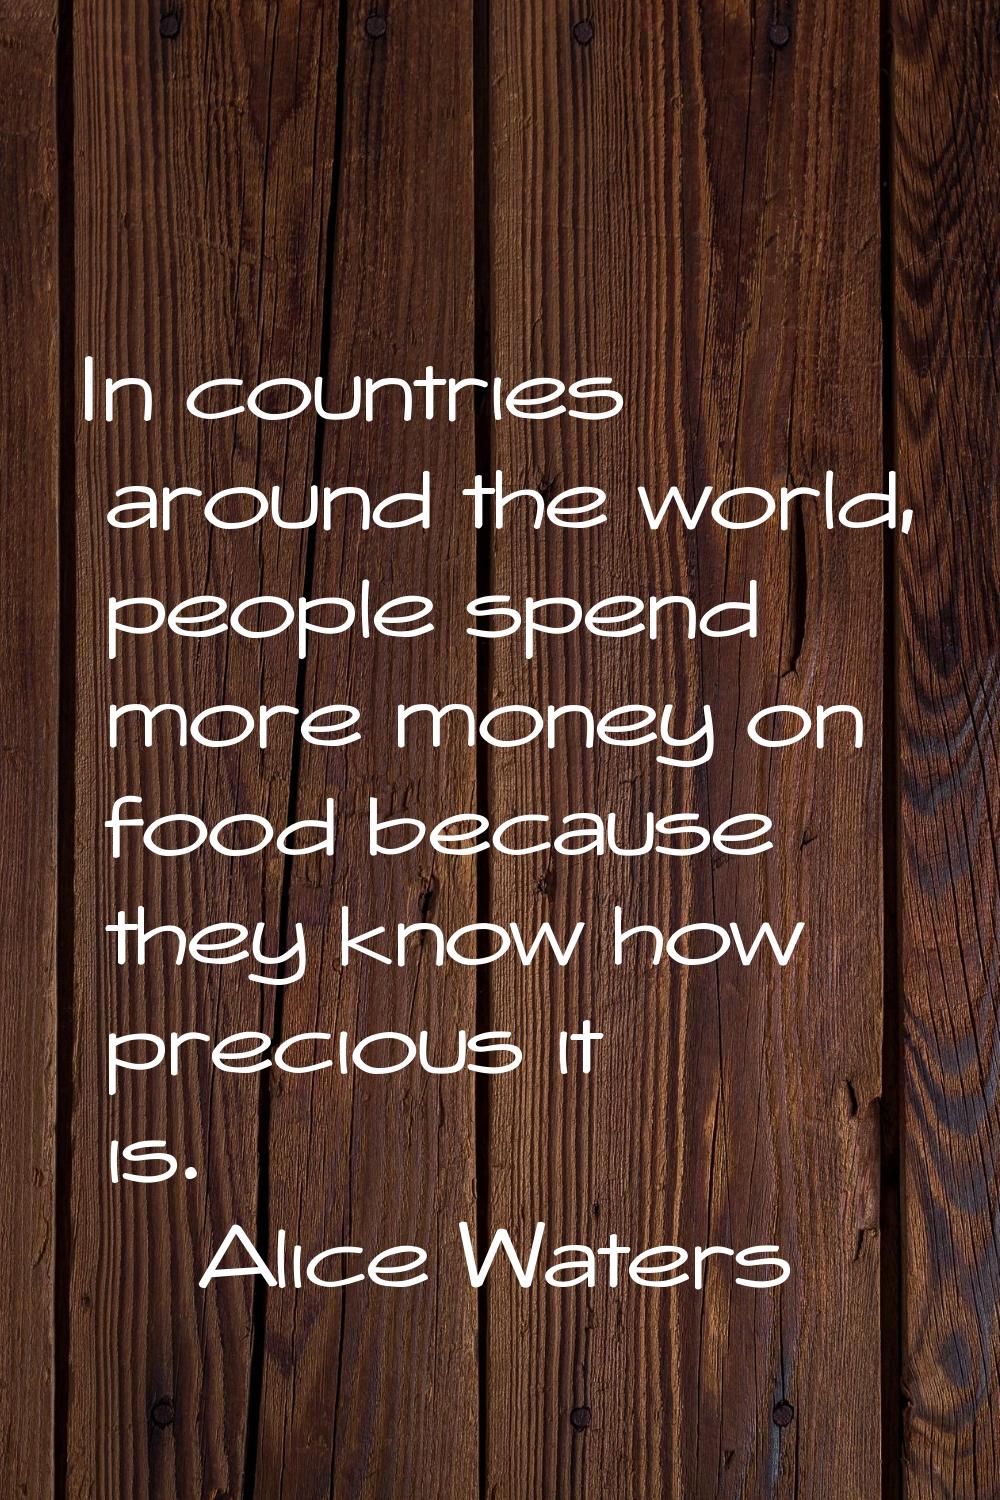 In countries around the world, people spend more money on food because they know how precious it is